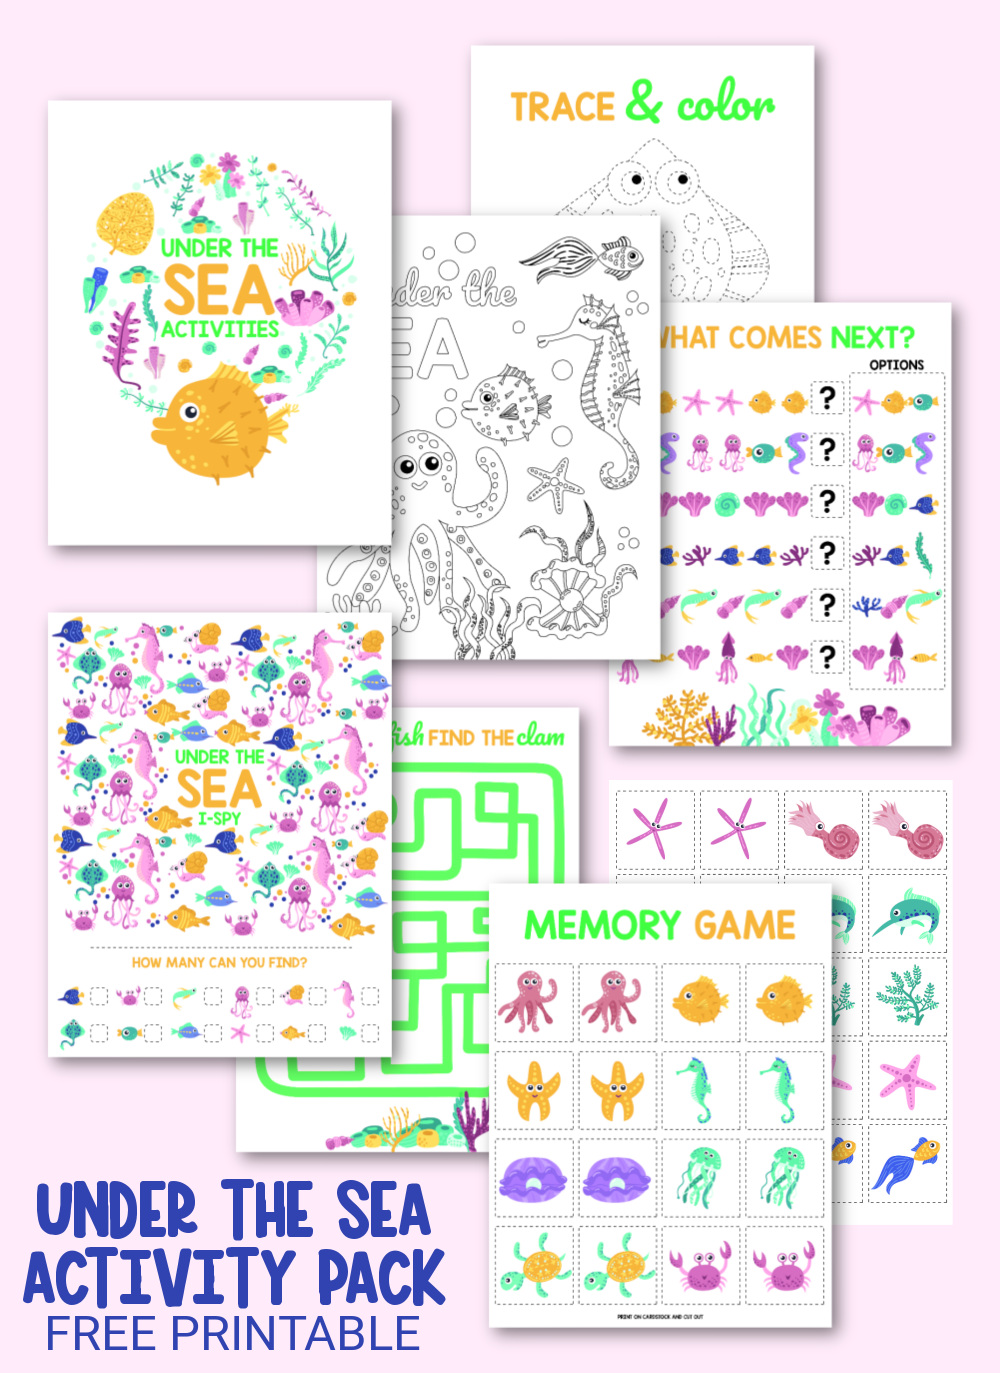 Under the Sea Activity Pack 